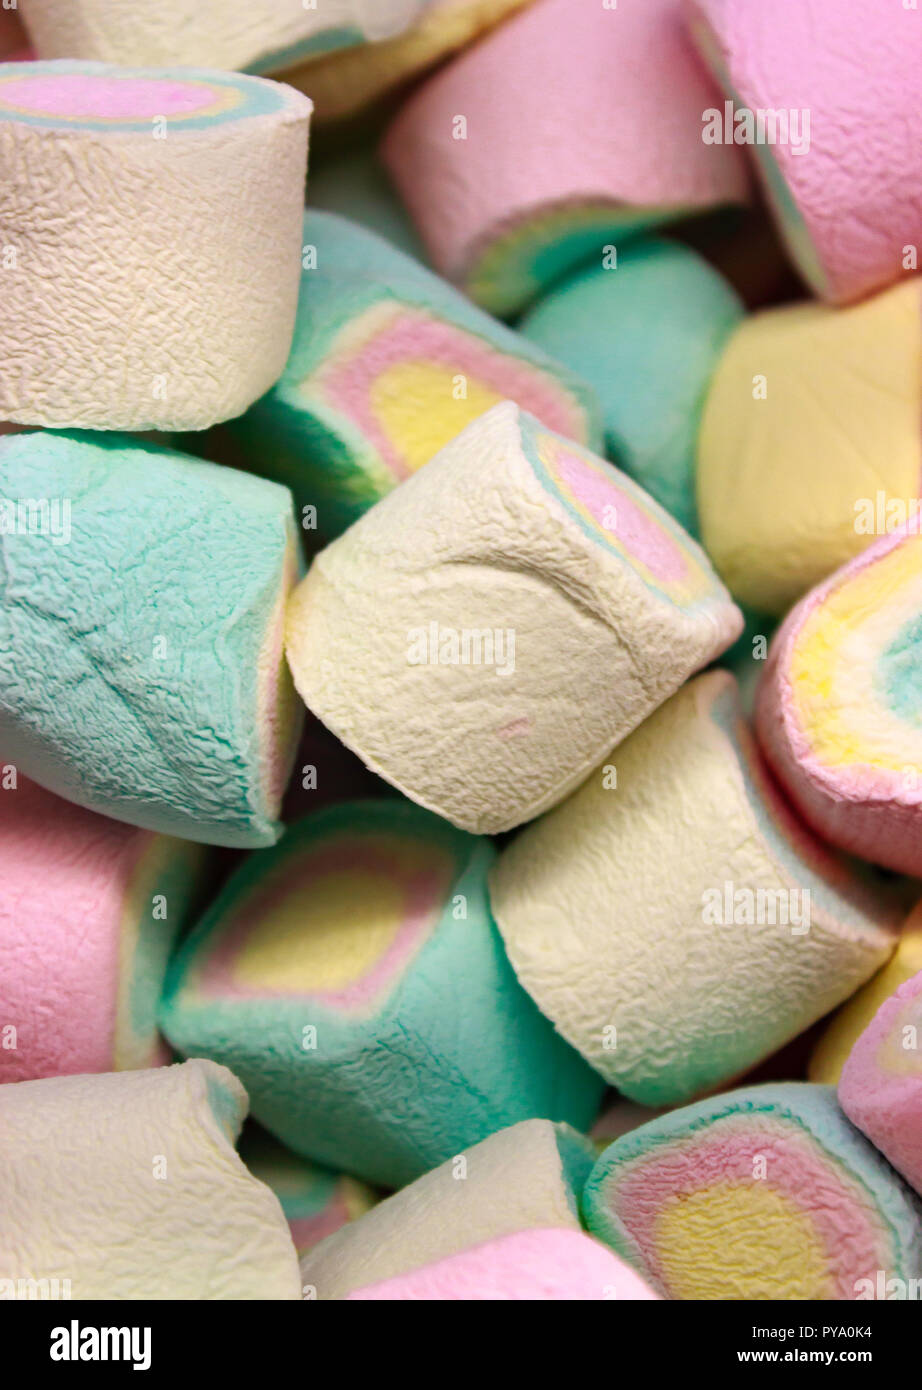 A close up image of pastel colored yellow, pink, blue and green marshmallows. Stock Photo